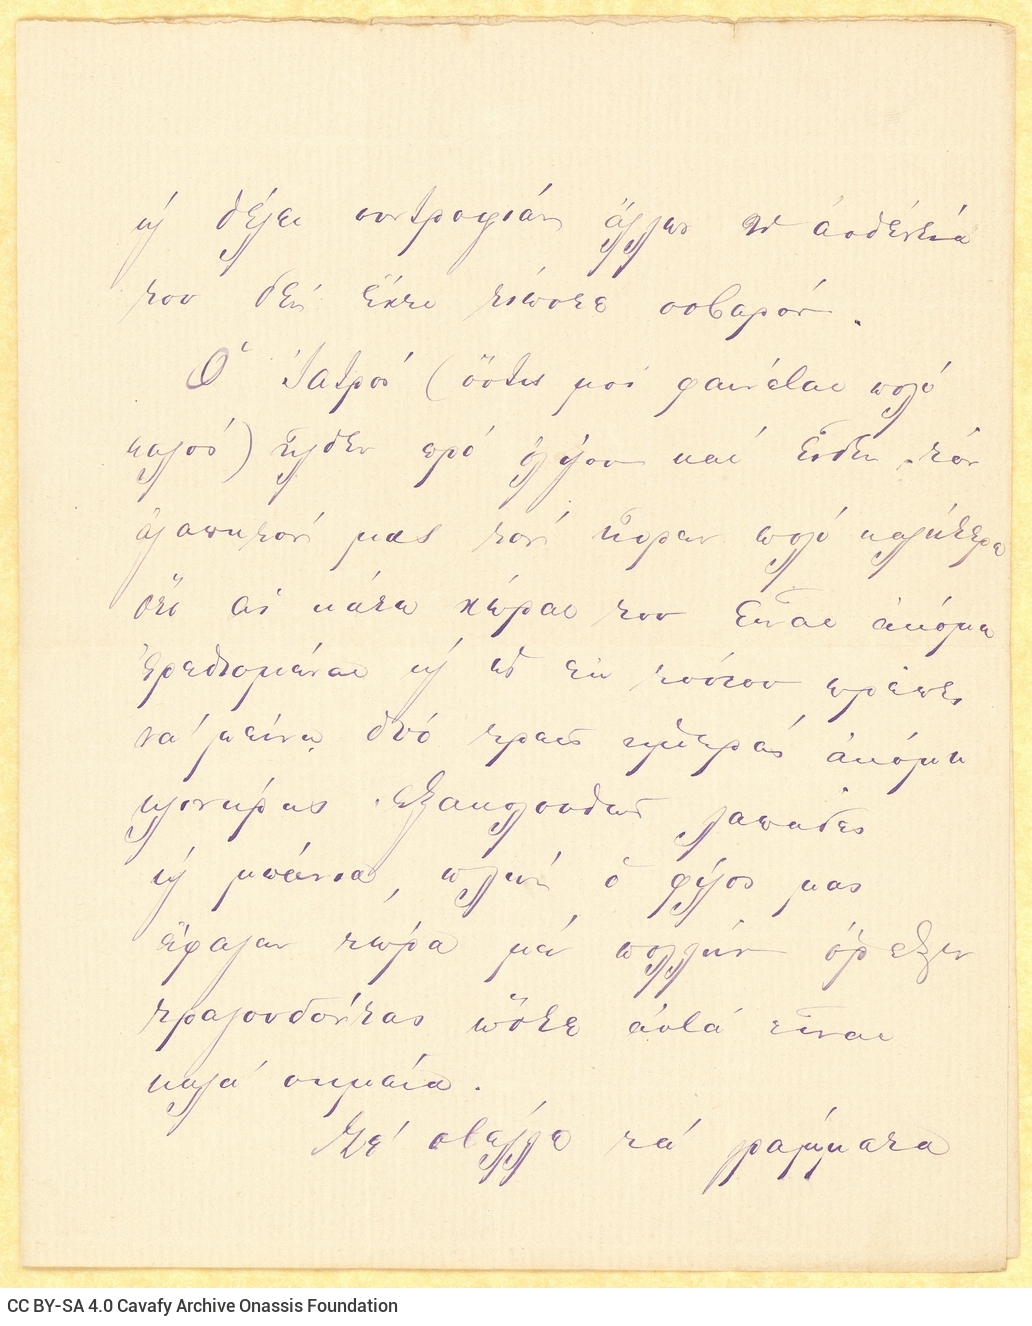 Handwritten letter by Alexandros Cavafy to his mother, Charikleia, on the first, third and fourth pages of a bifolio. The sec